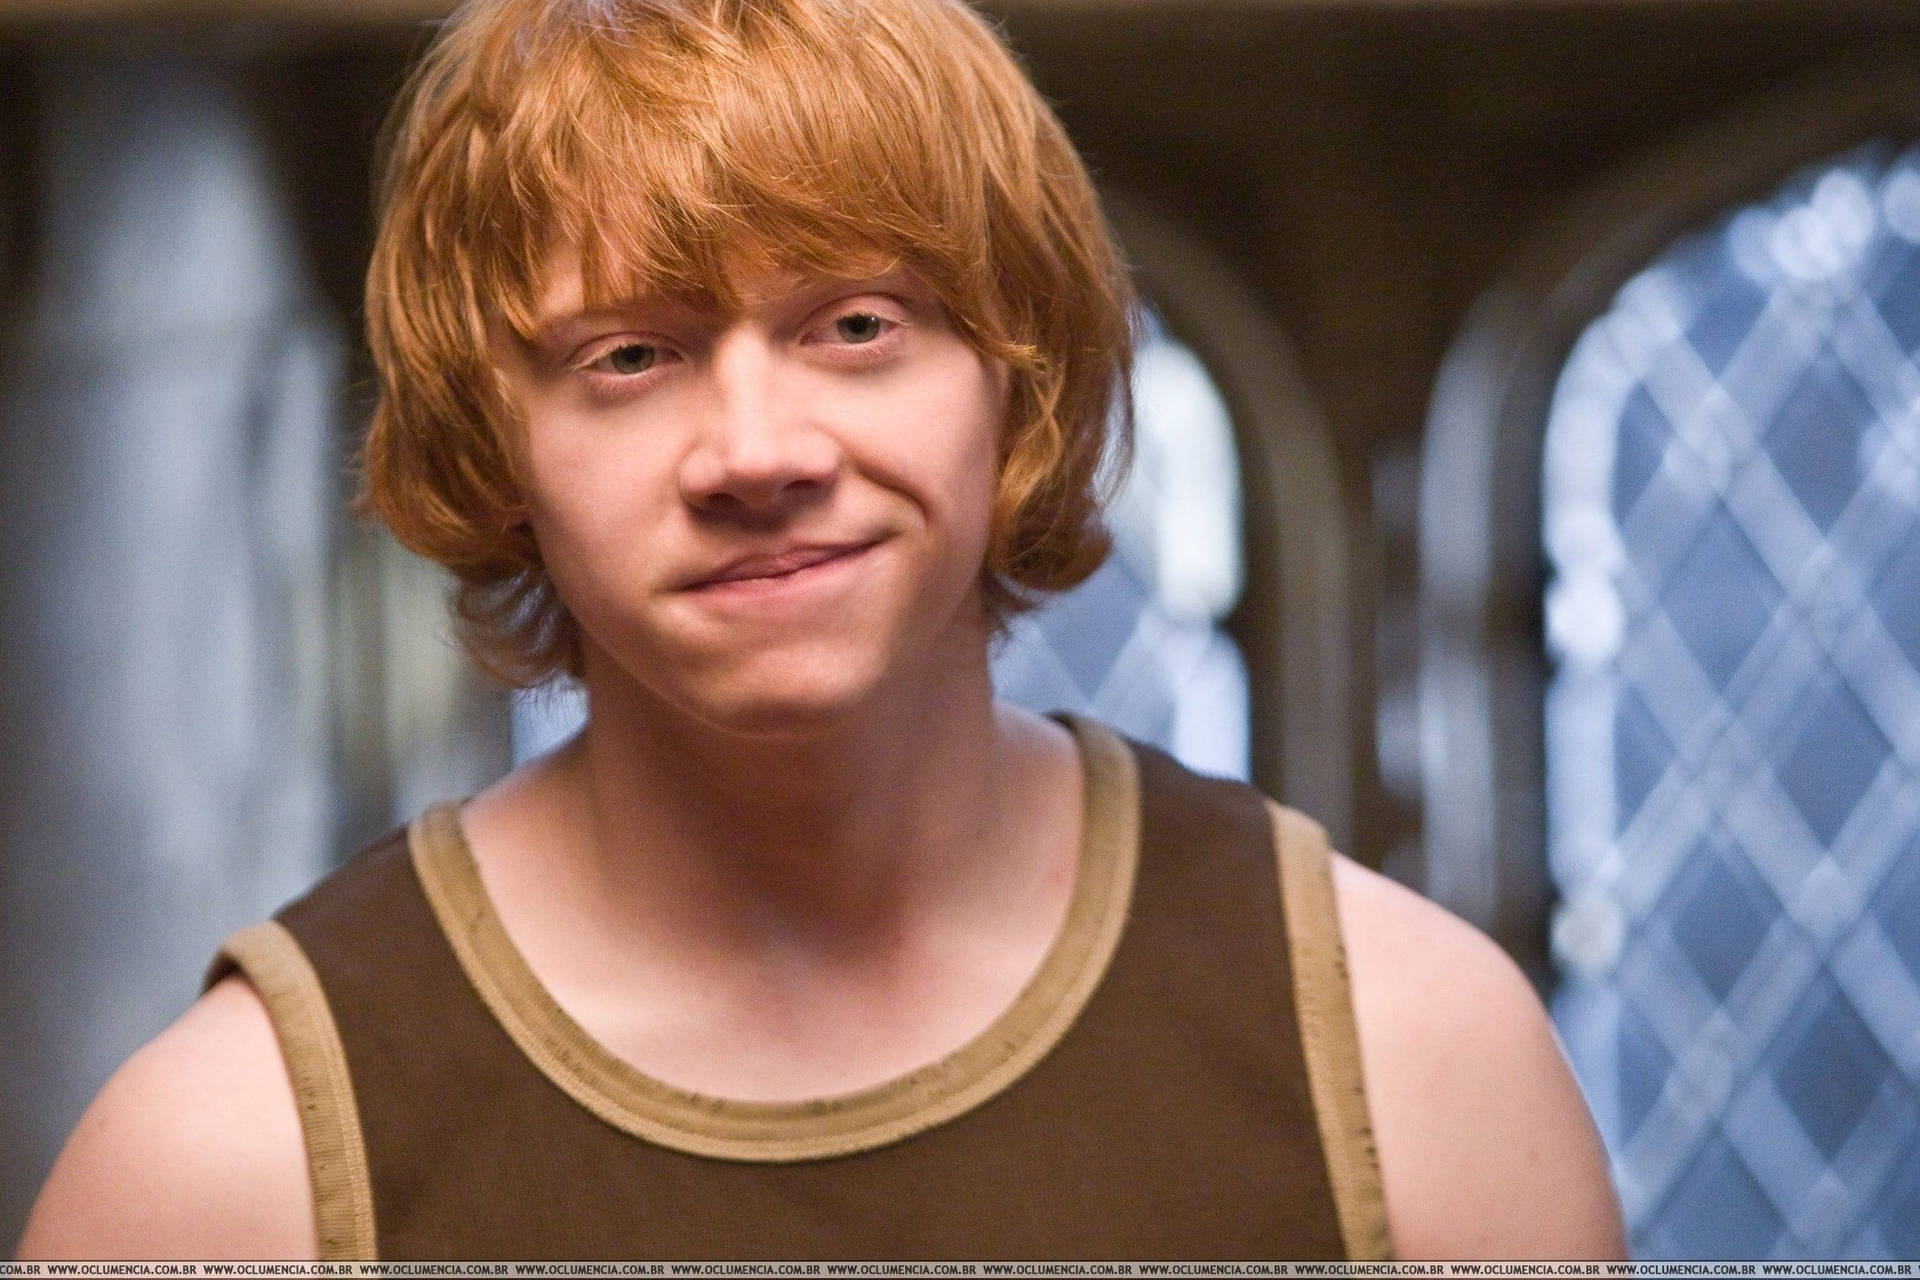 Ron Weasley Smiling Background